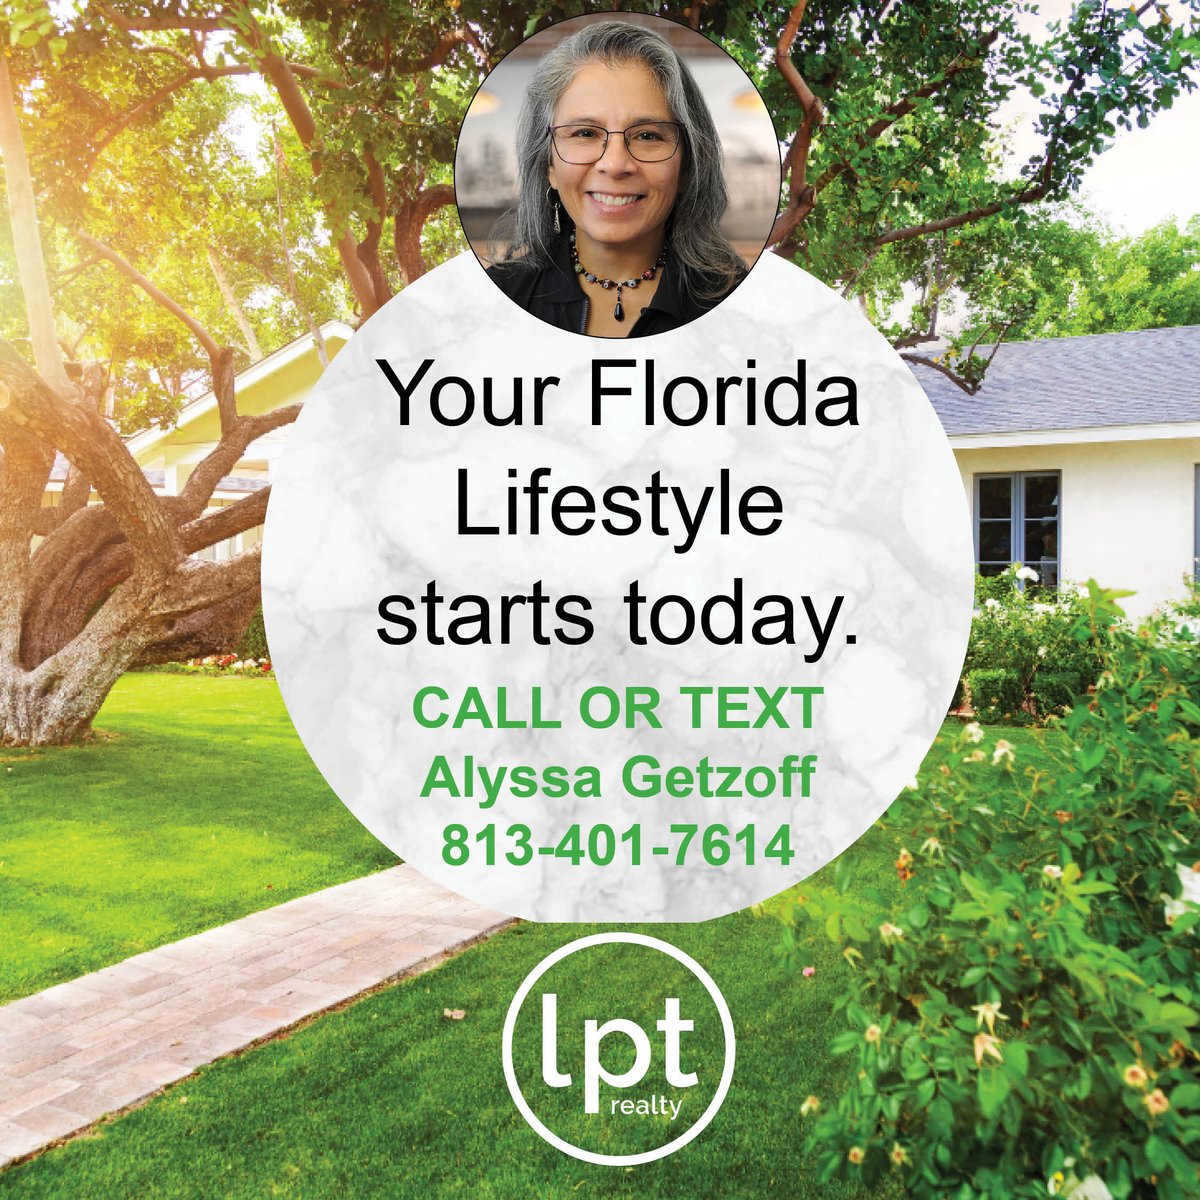 Your Florida Lifestyle starts today!
Give me a call at 813-401-7614 and let's chat.

#TampaBayRealEstate #HomesInTampa #realestate #luxuryhomes #MovingToTampaBay #LPTRealty #TampaRealtor